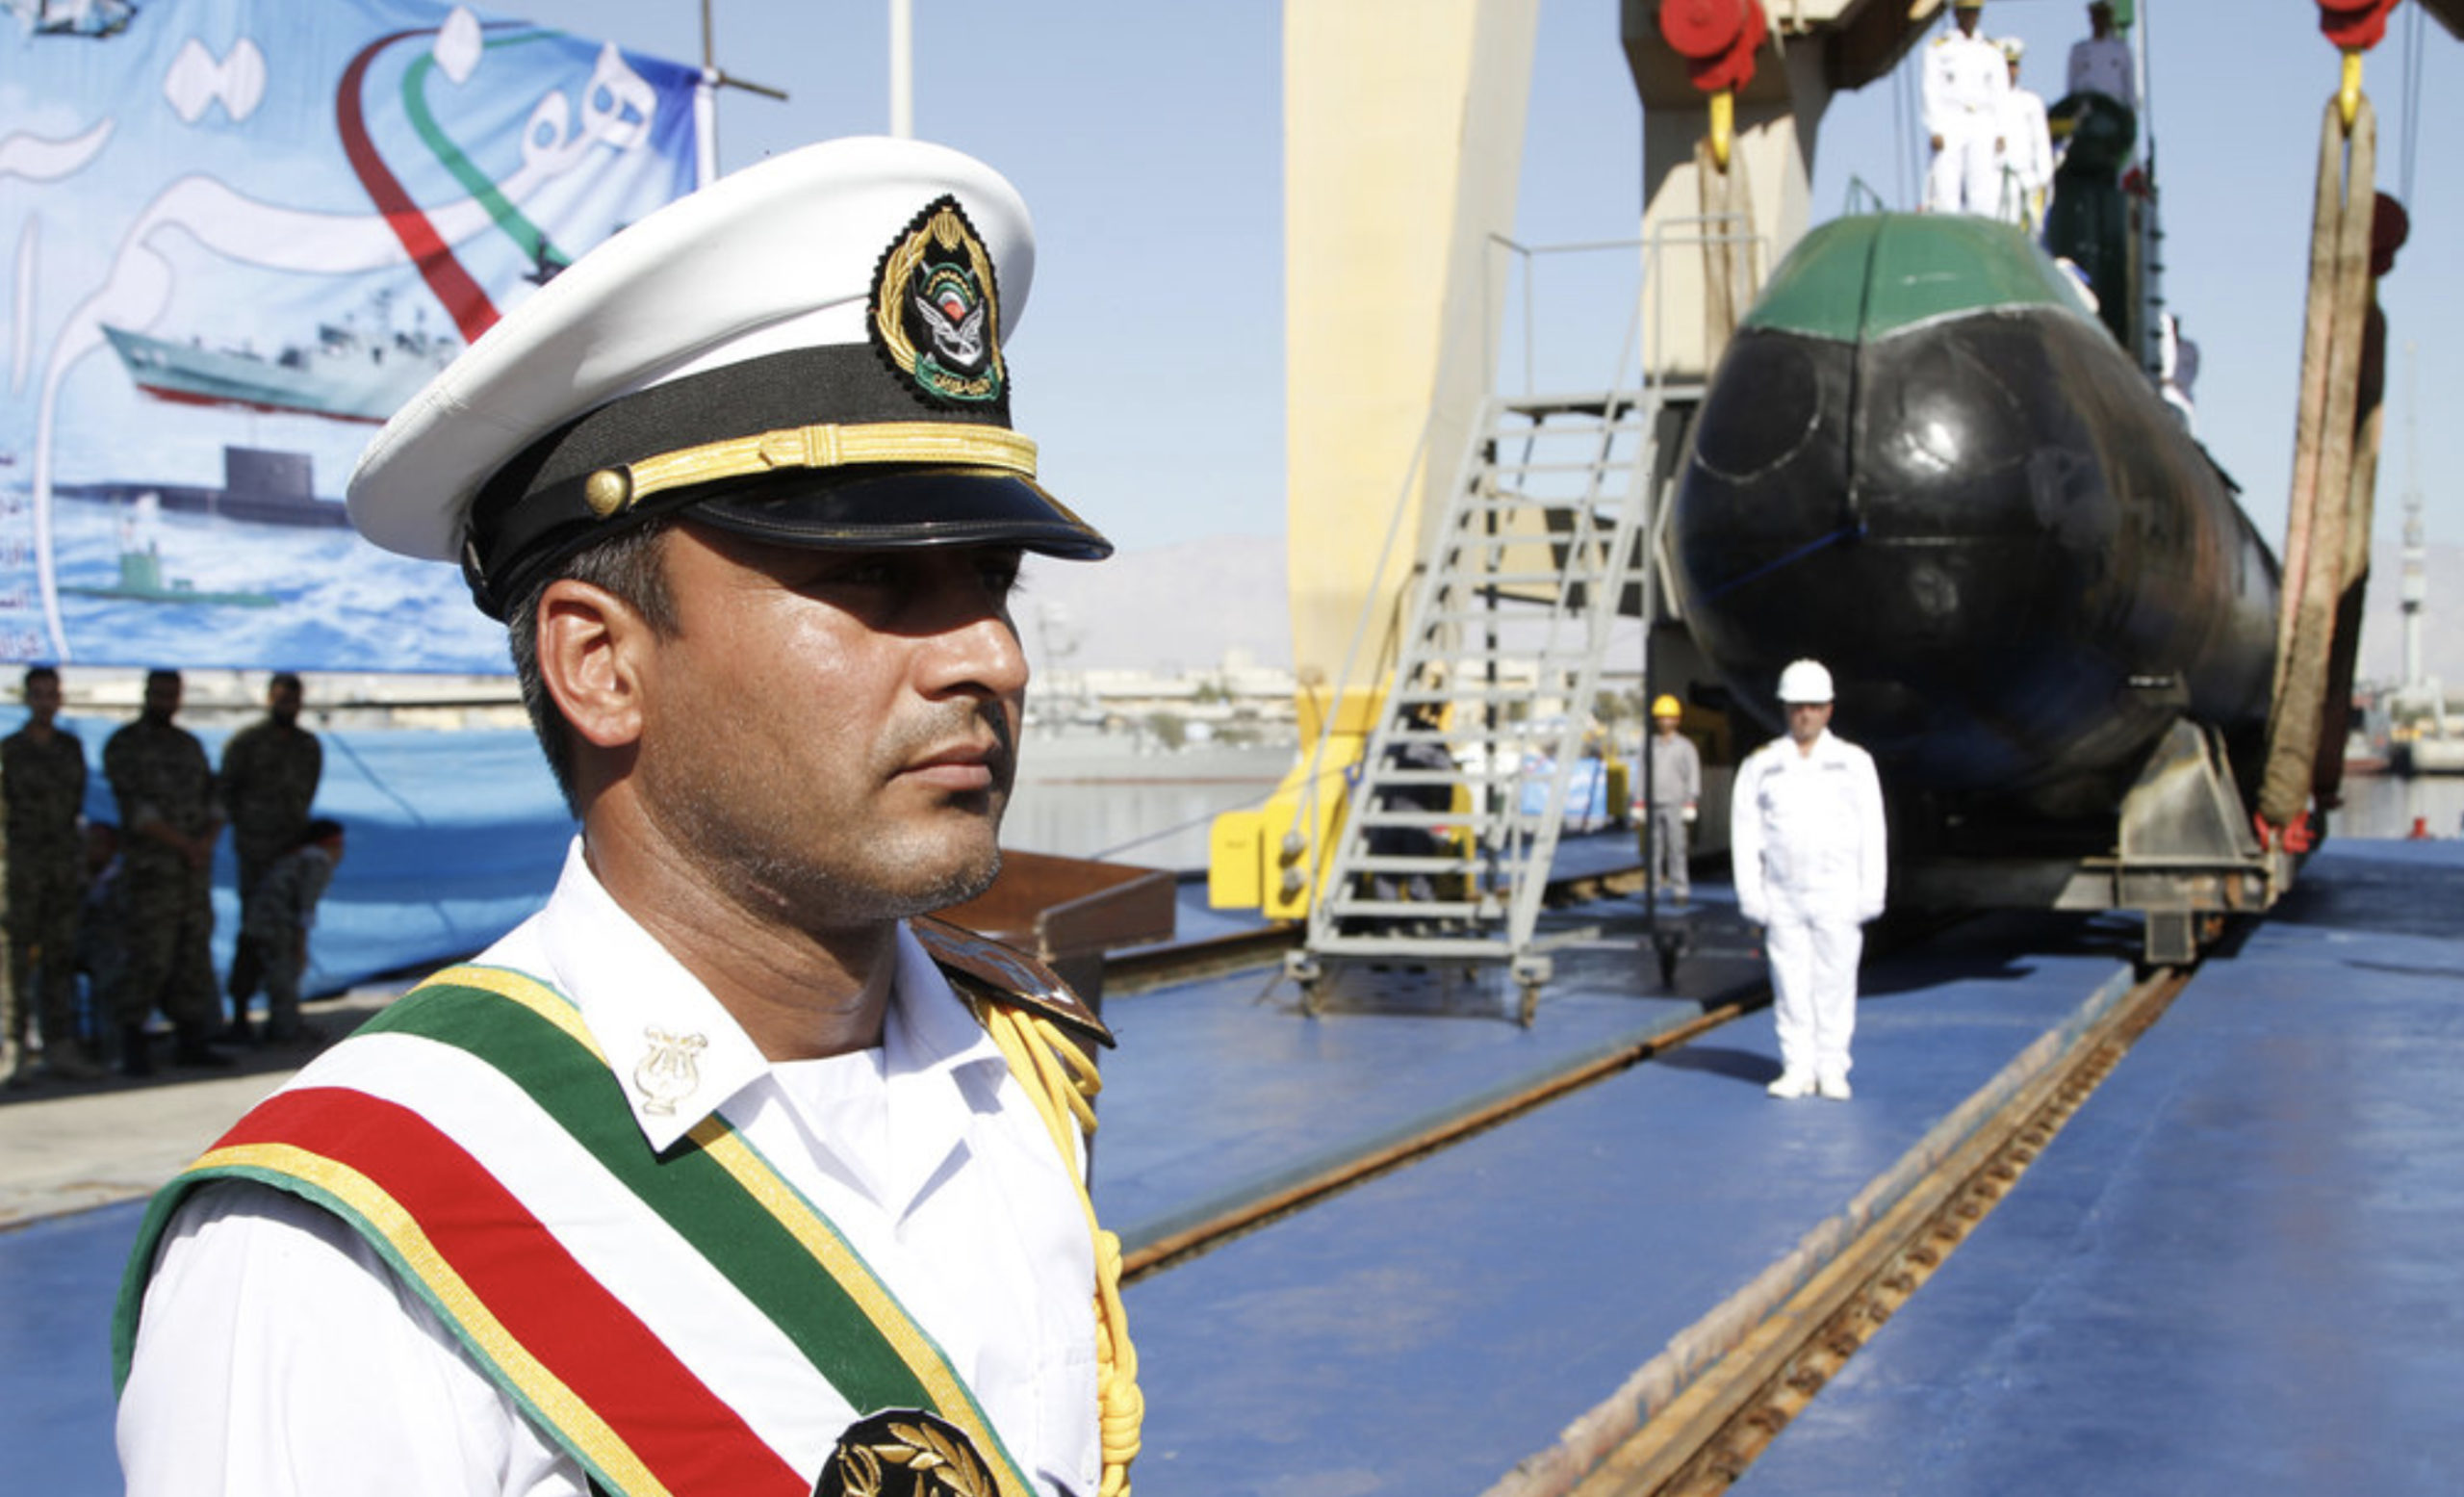 The Negev Summit: Challenging Iran’s Grand Maritime Vision?